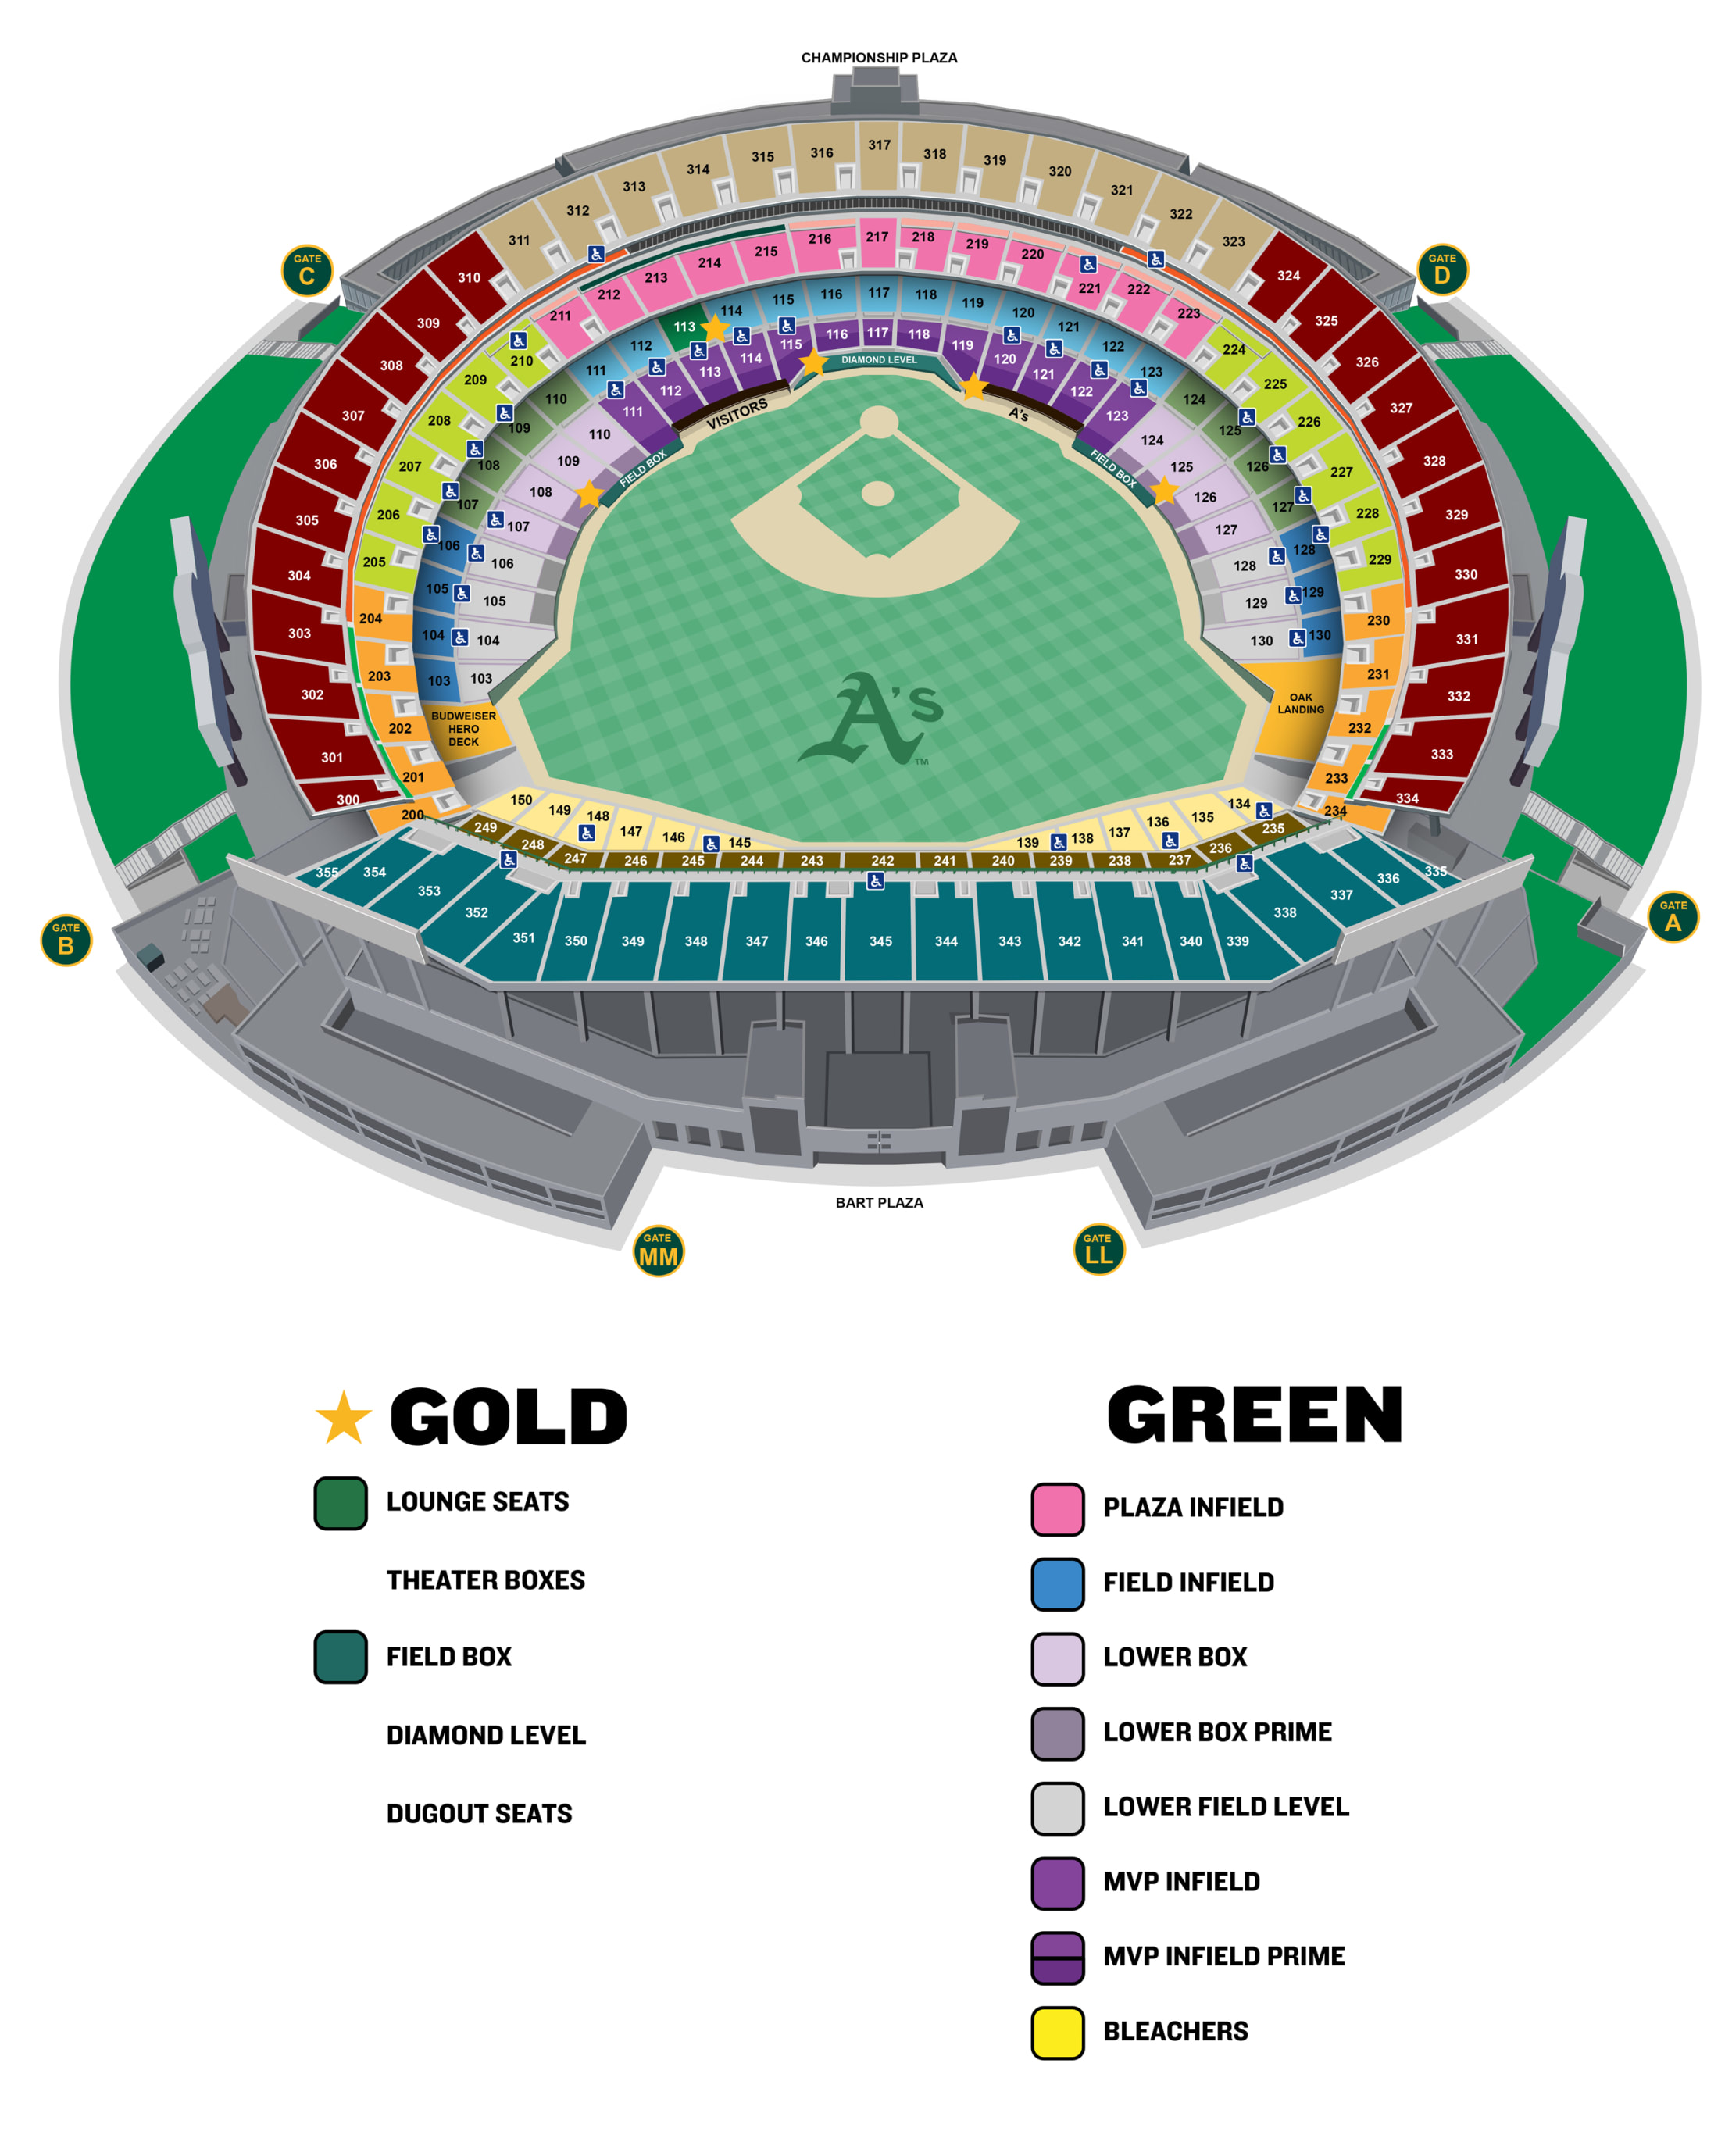 Gold Seating Areas Oakland Athletics